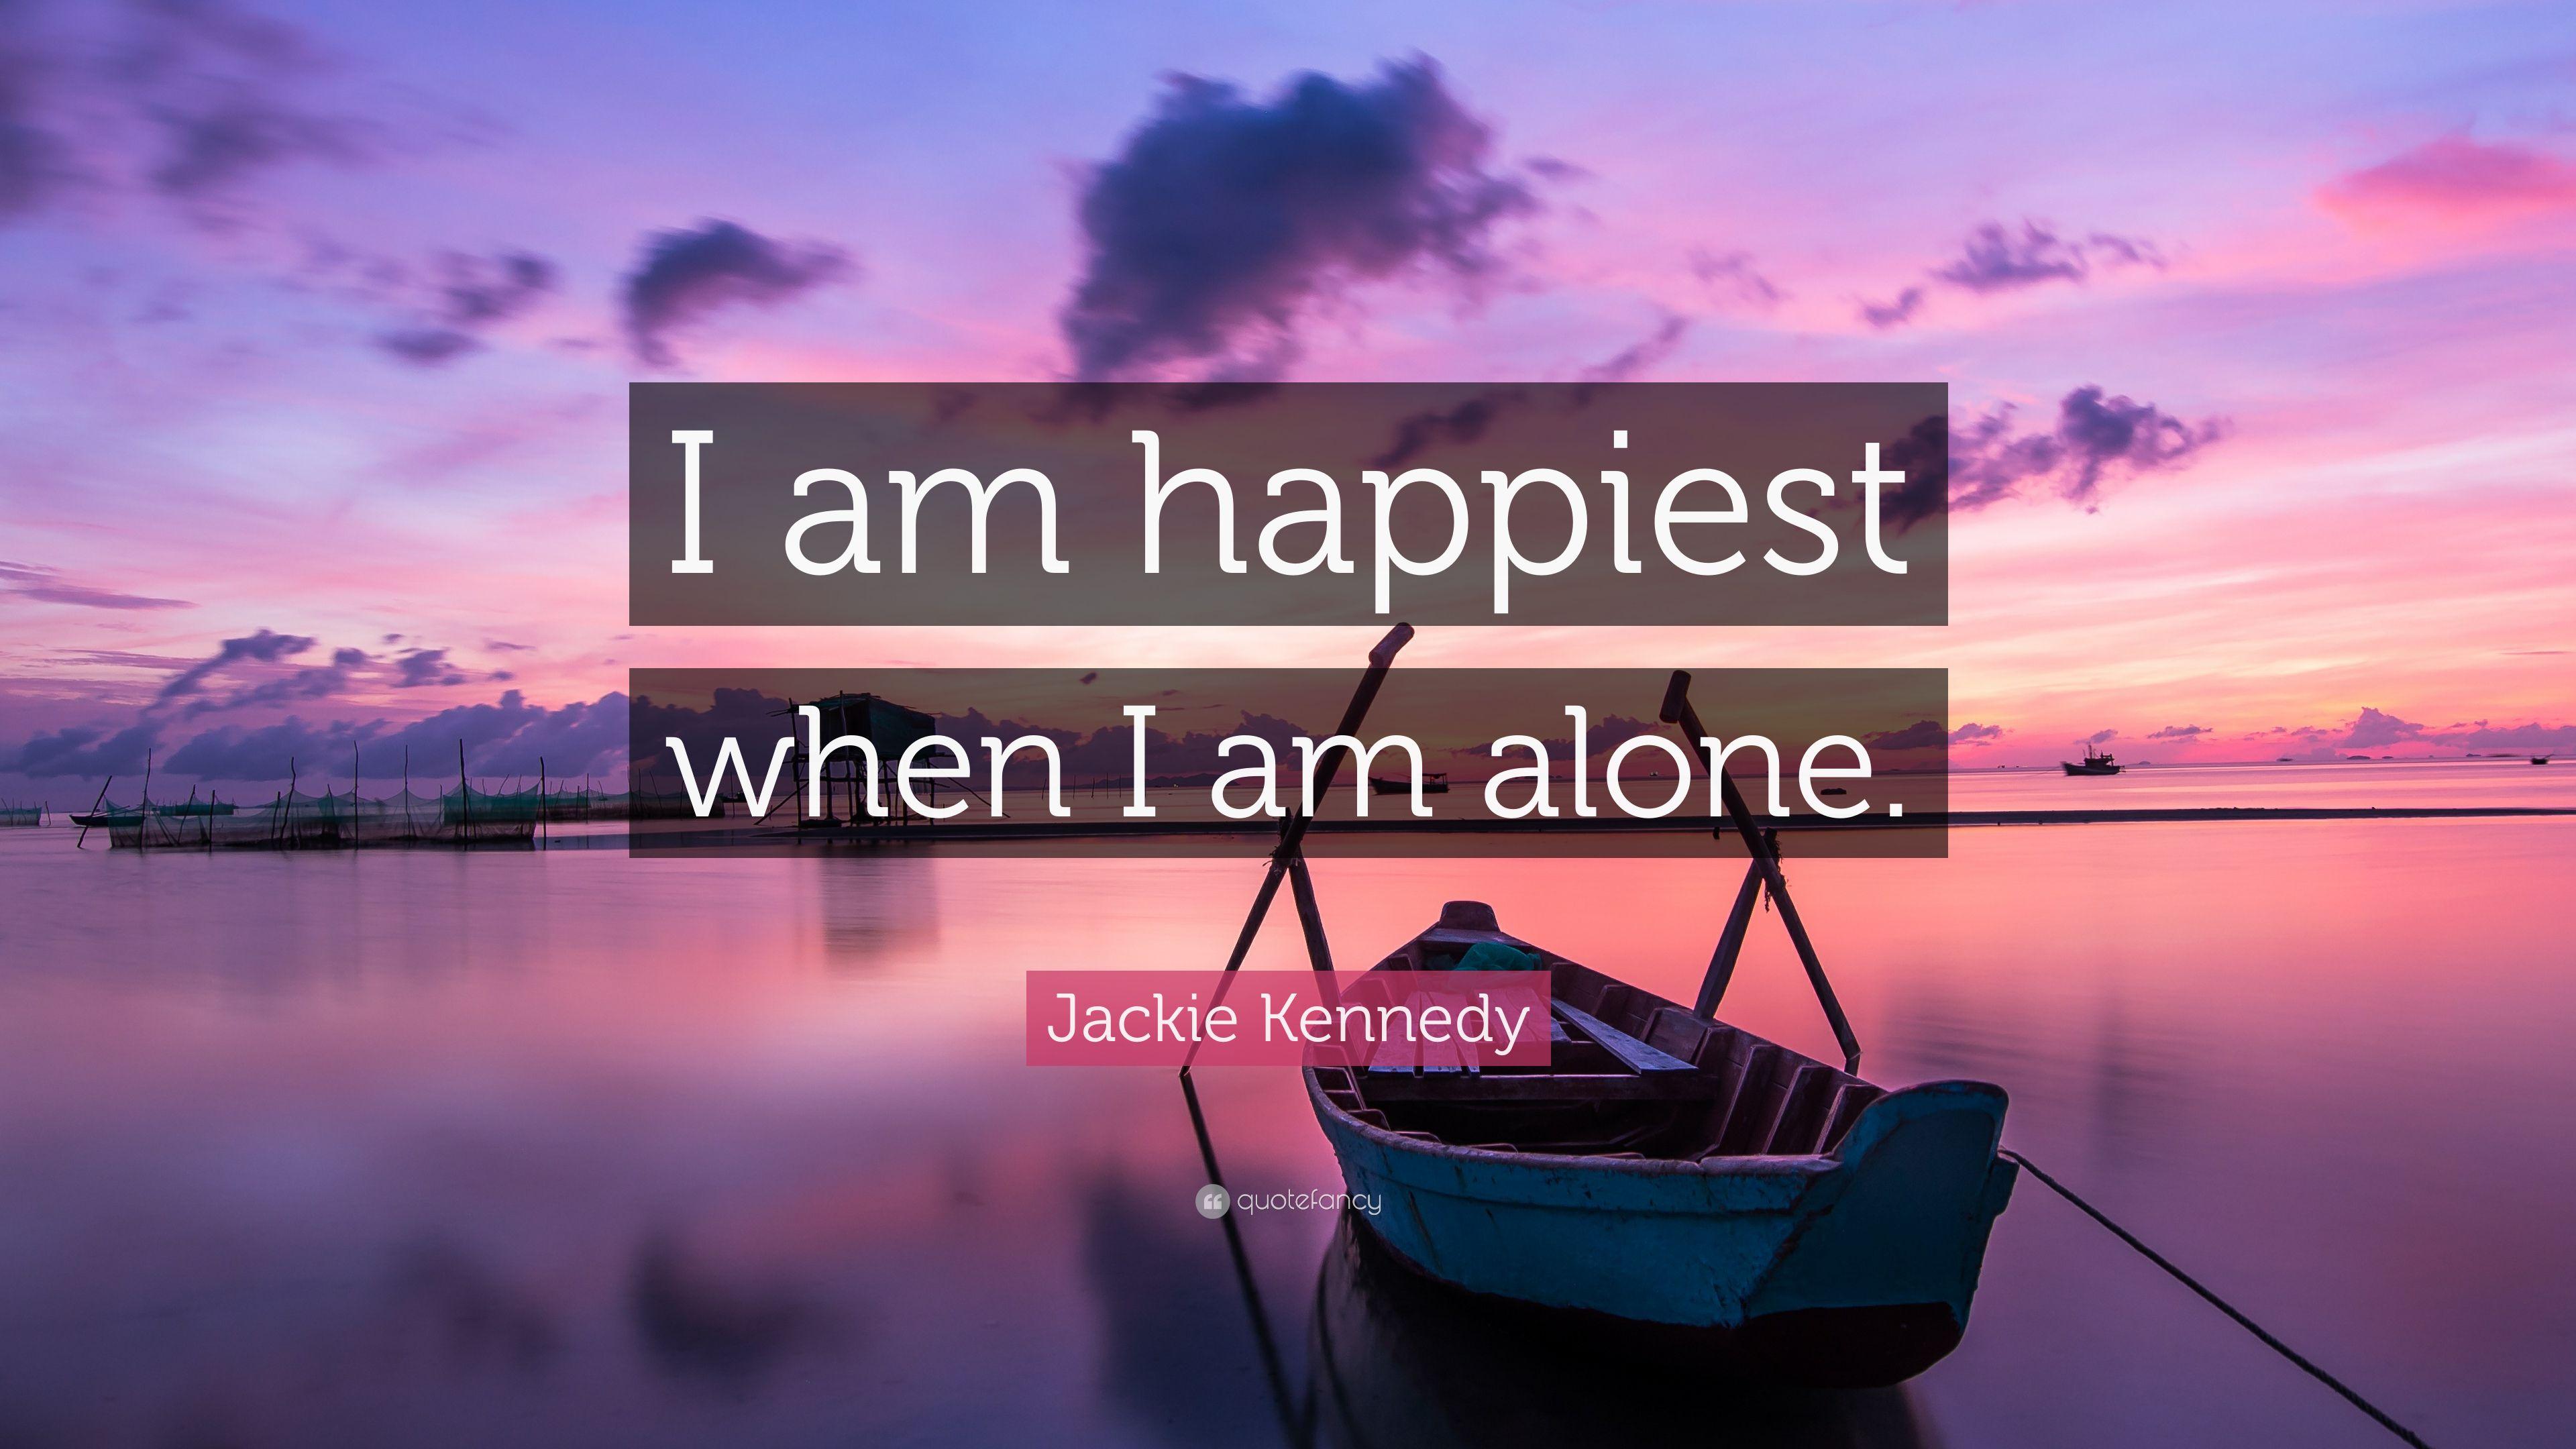 Jackie Kennedy Quote: “I am happiest when I am alone.” 9 wallpaper